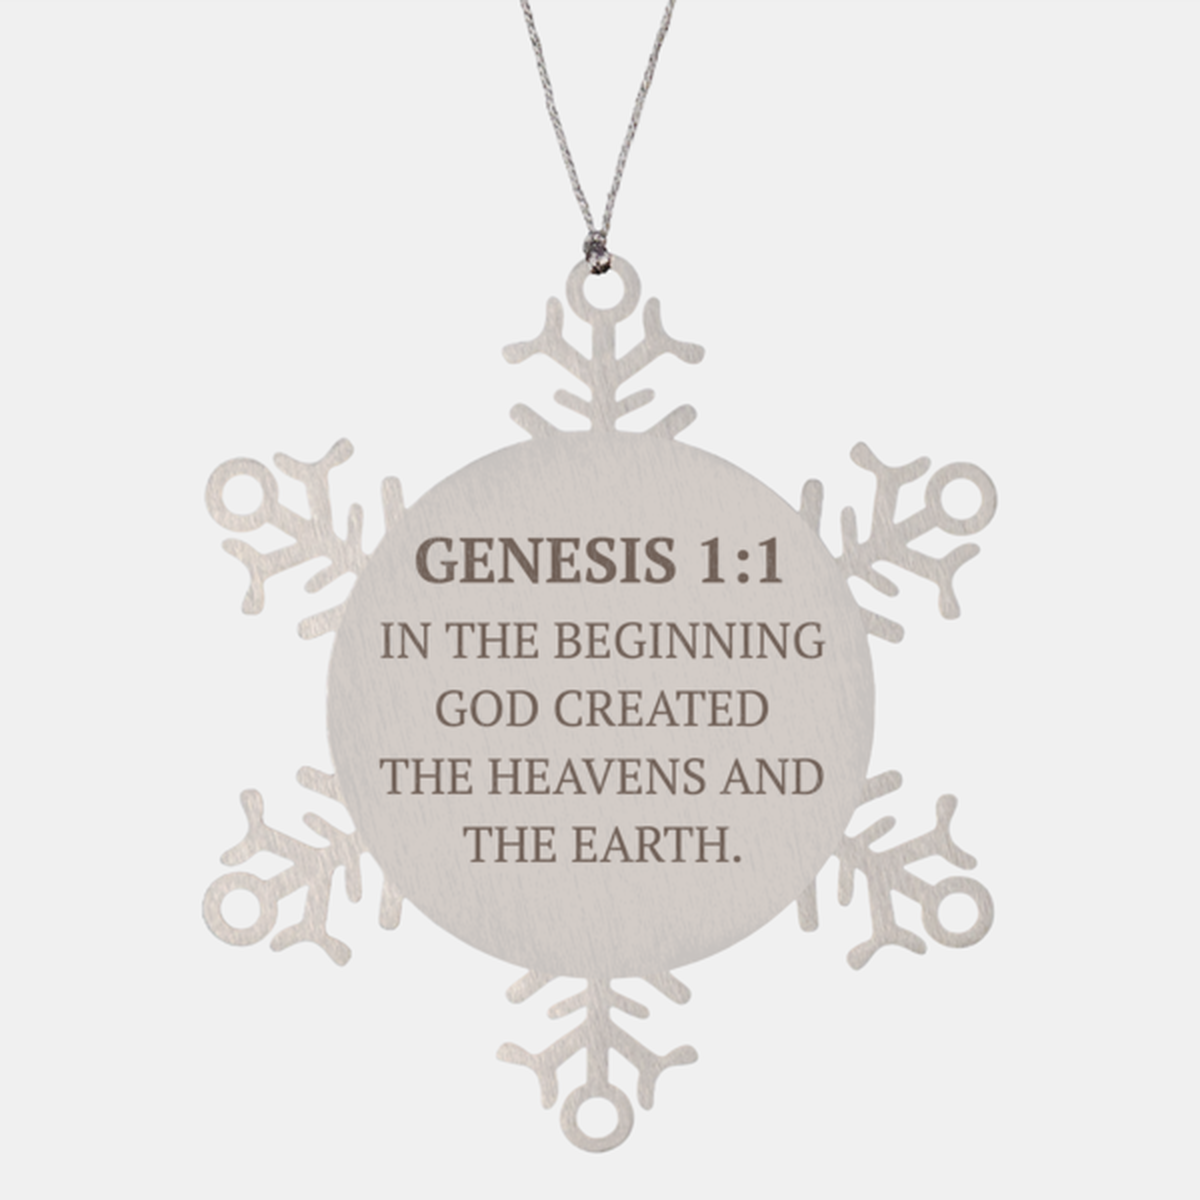 Christian Ornaments For Christmas Tree, In The Beginning God Created The Heavens And The Earth, Religious Christmas Decorations, Scripture Ornaments Gifts, Bible Verse Ornament